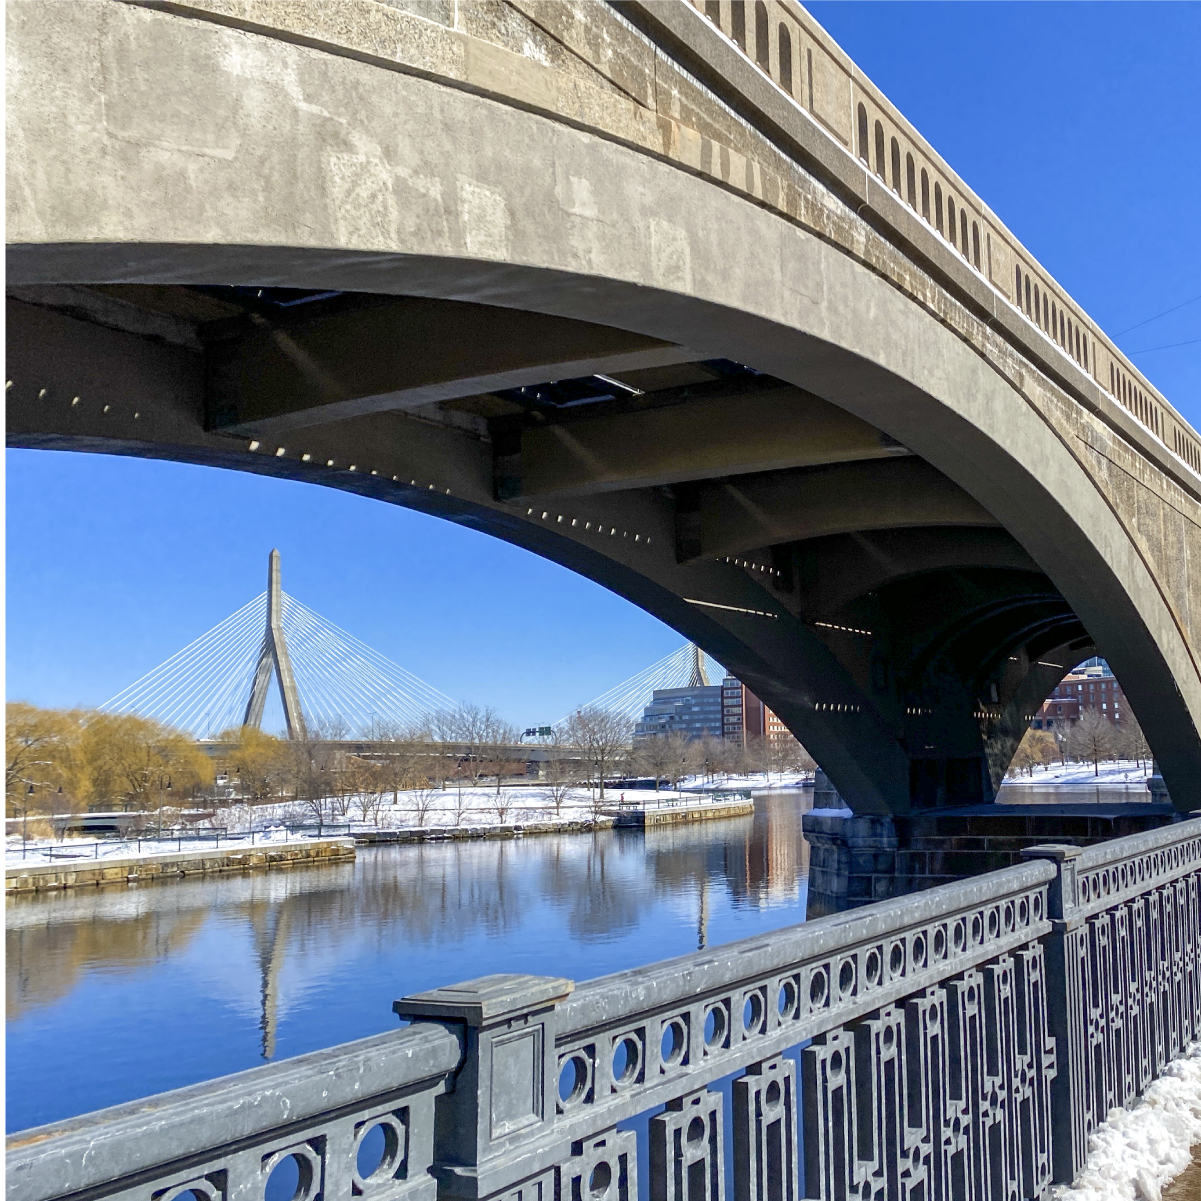 a bridge arch over the lechmere viaduct on a clear blue sky day